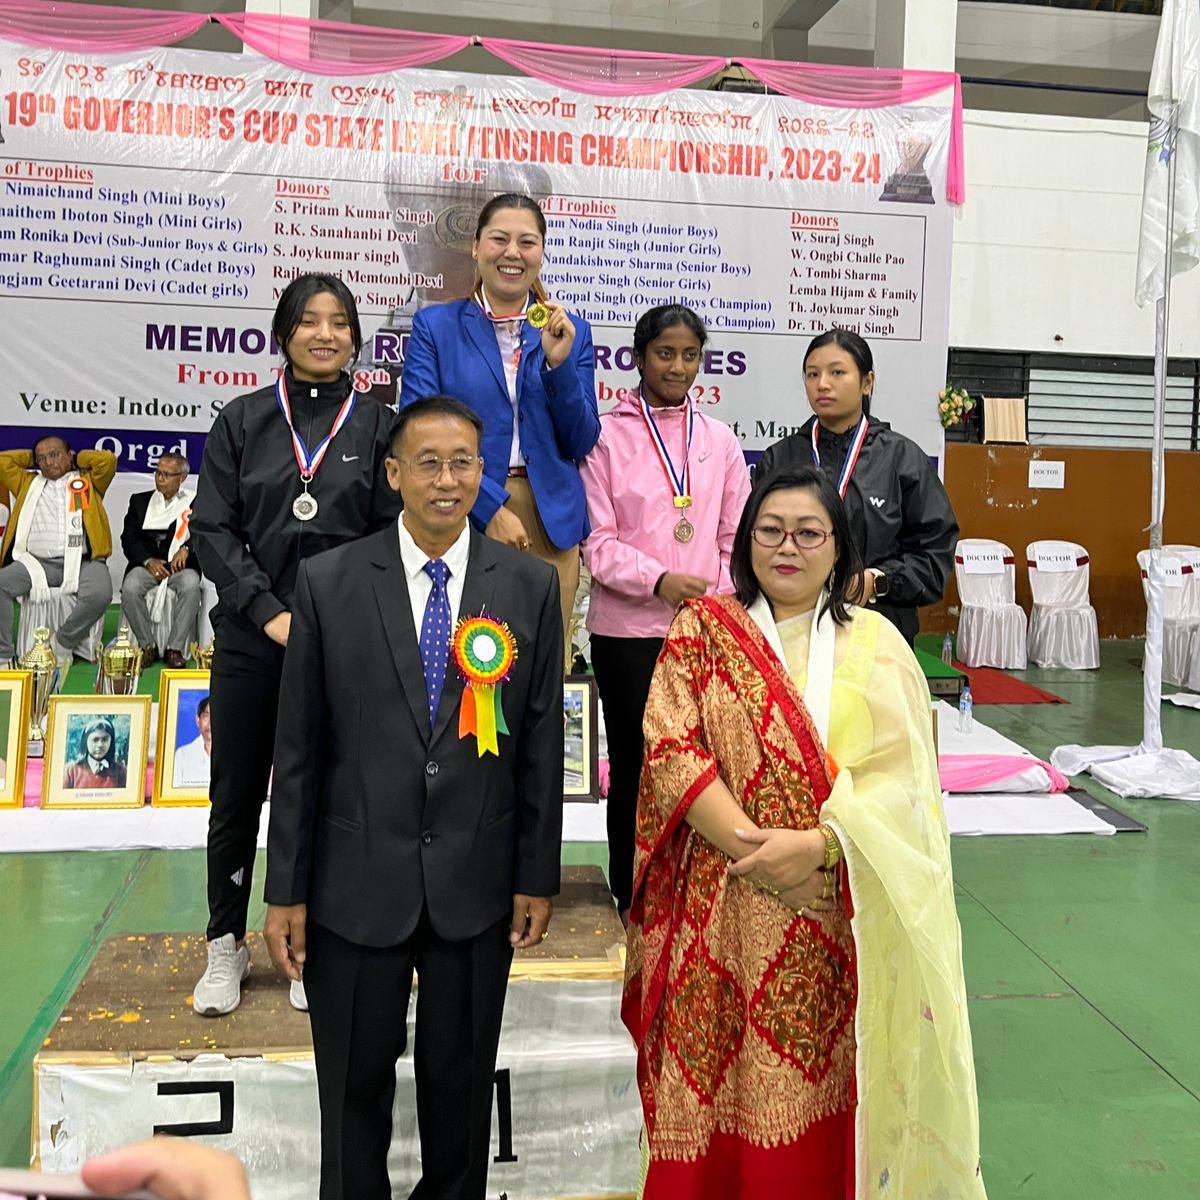  Diana Thingujam of MASP 1st Sem of National Sports University, Manipur won the Gold in the 19th Governor's Cup State Level Fencing Championship 2023-24 at SAI NERC Indoor Hall Takyel, Imphal, Manipur.